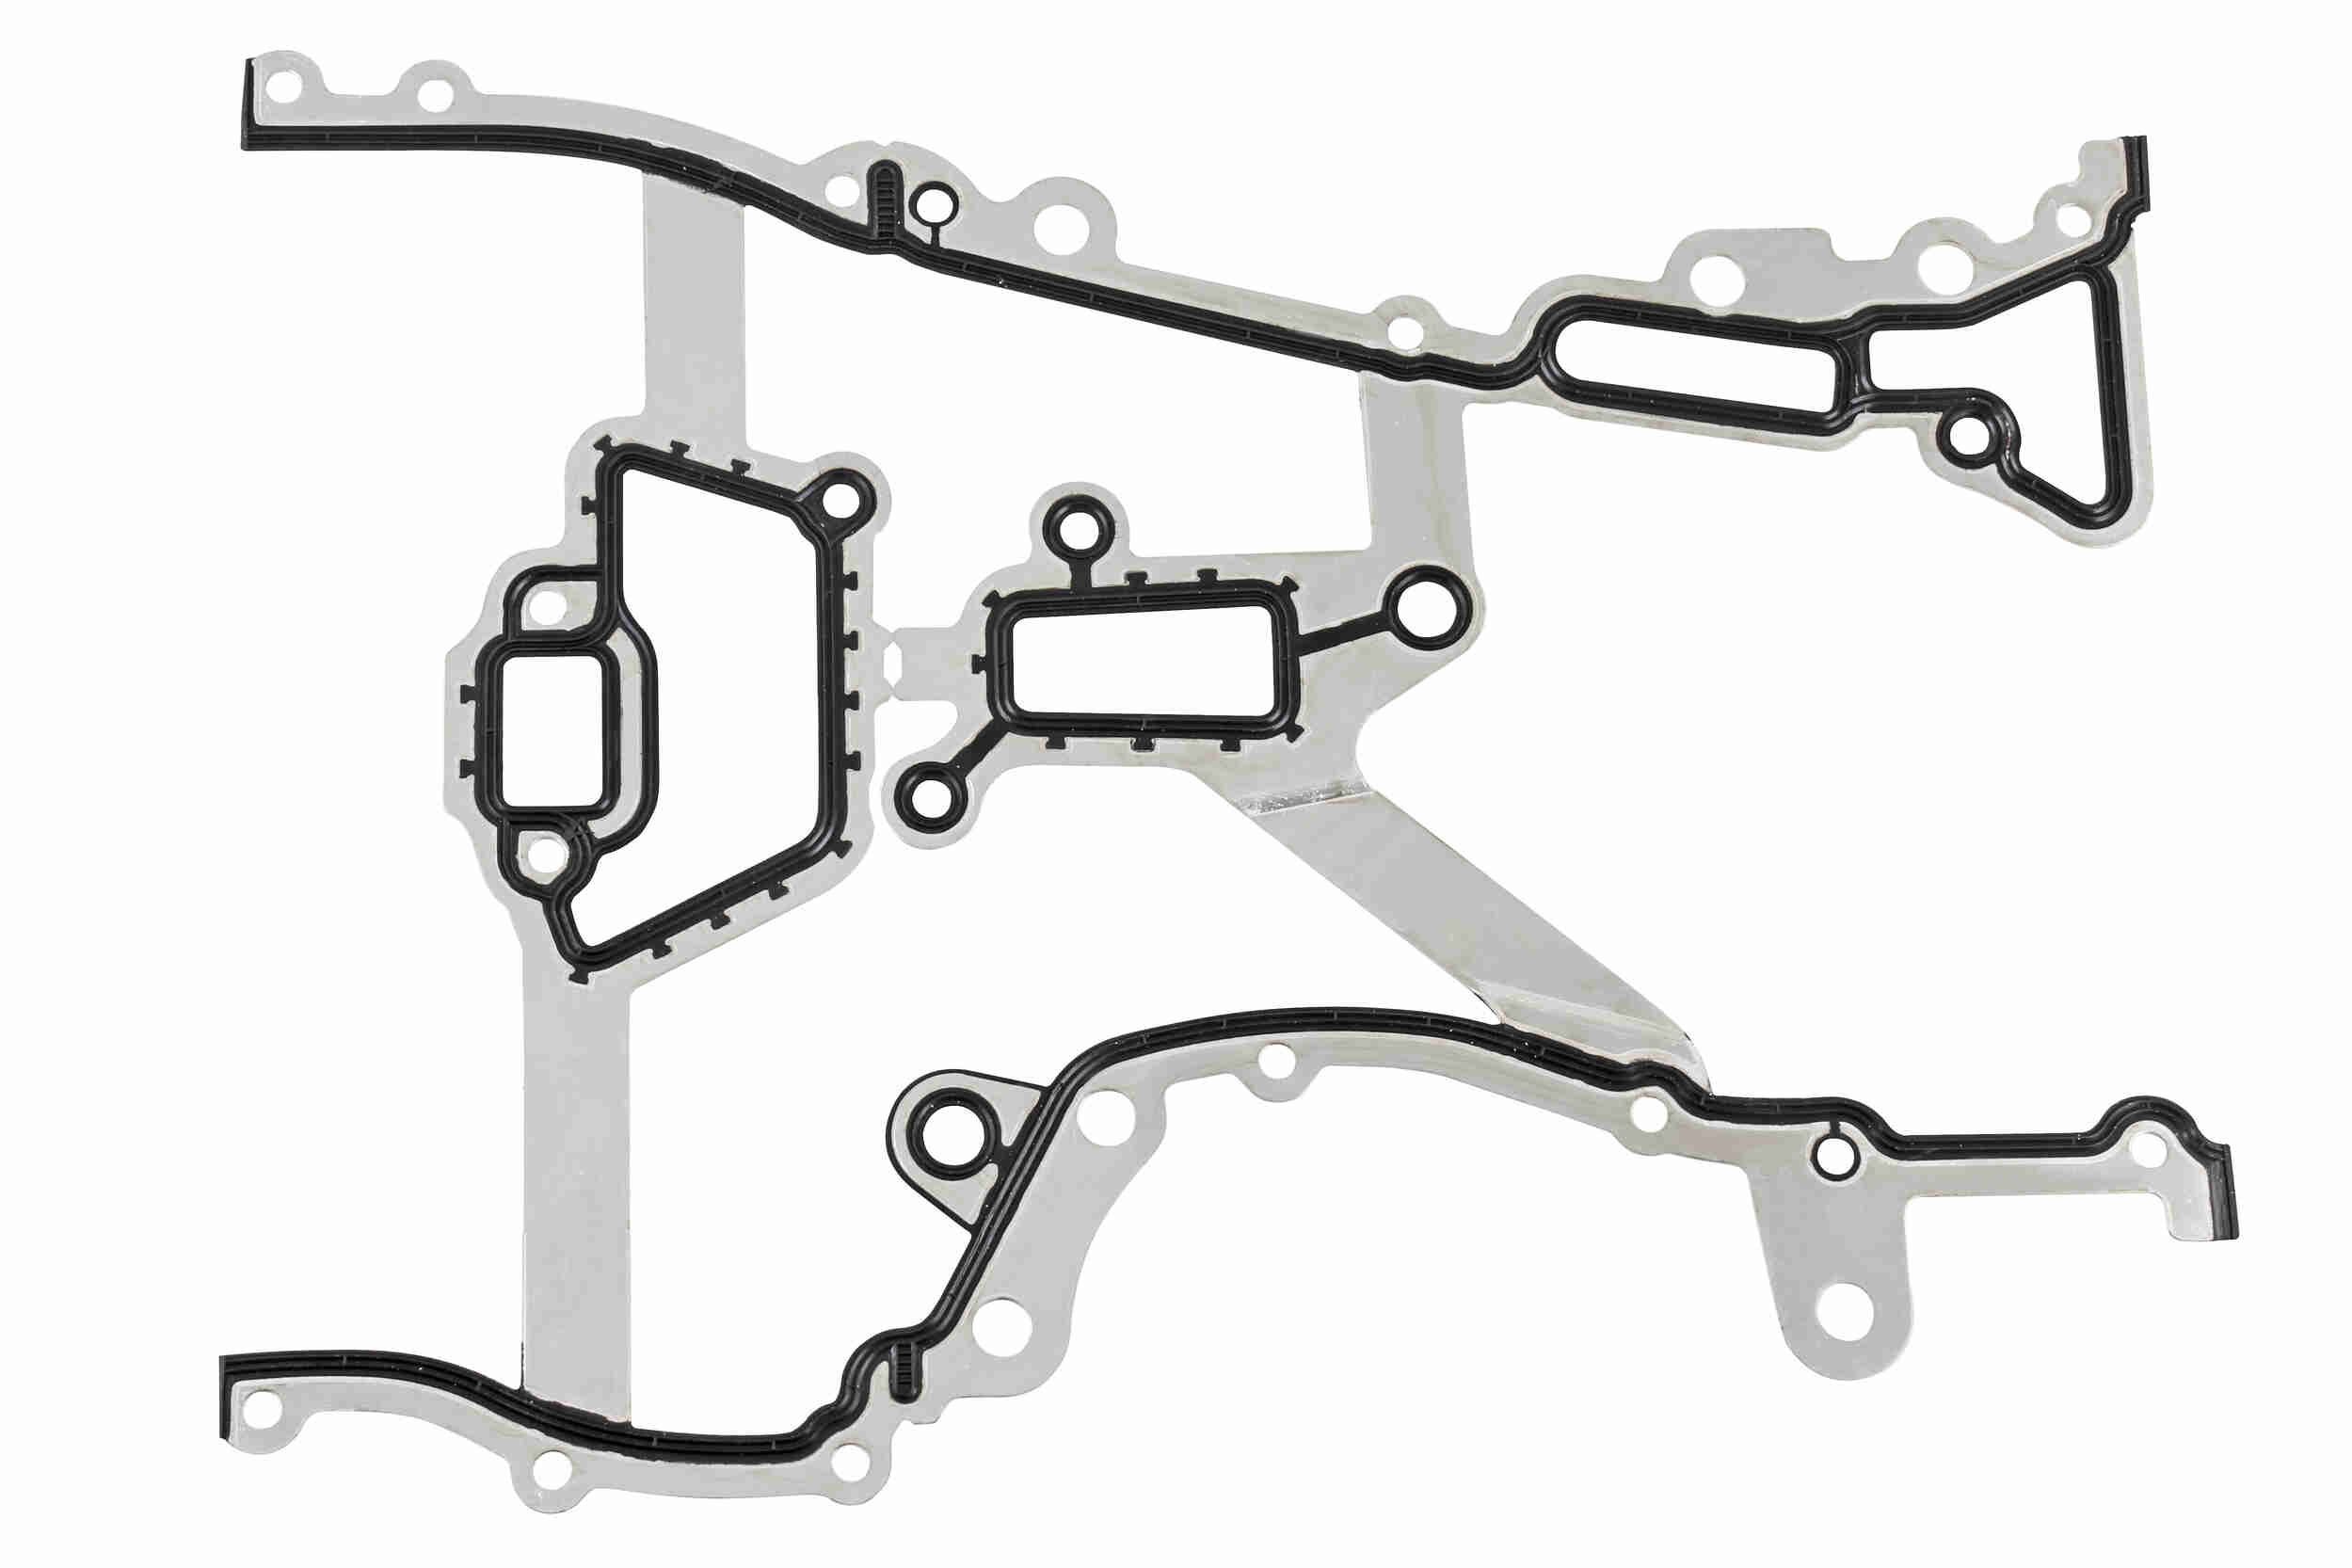 Timing cover gasket V40-1950 Opel Astra g f48 2.0OPC (F08, F48) 200hp 147kW MY 2005